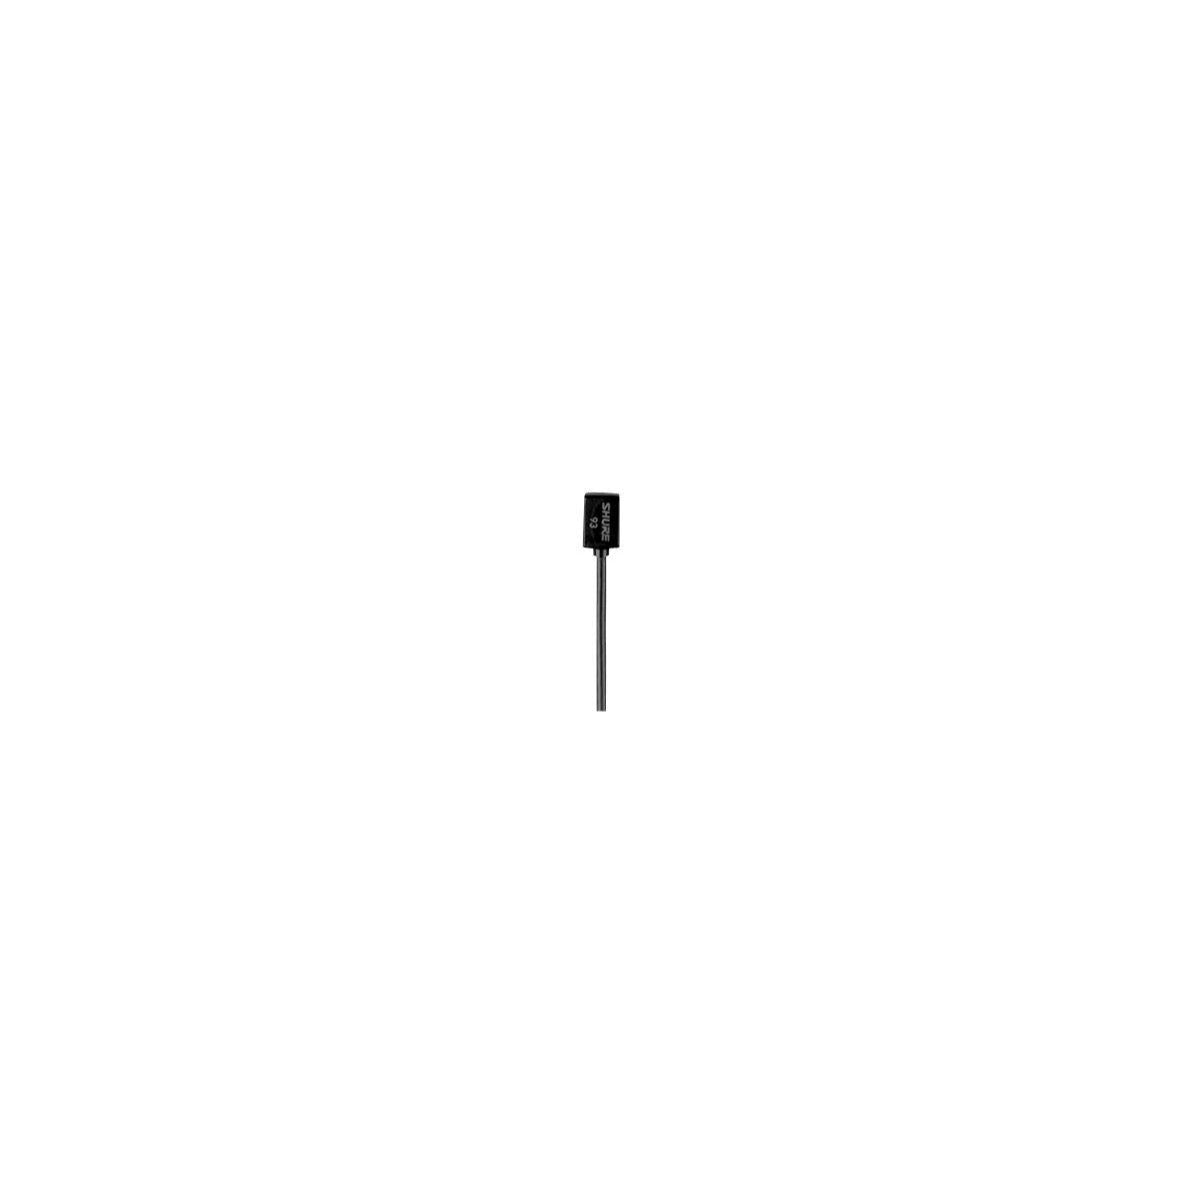 Shure WL93 Omnidirectional Lavalier Microphone, Black, WL93, with 4 Foot Cable